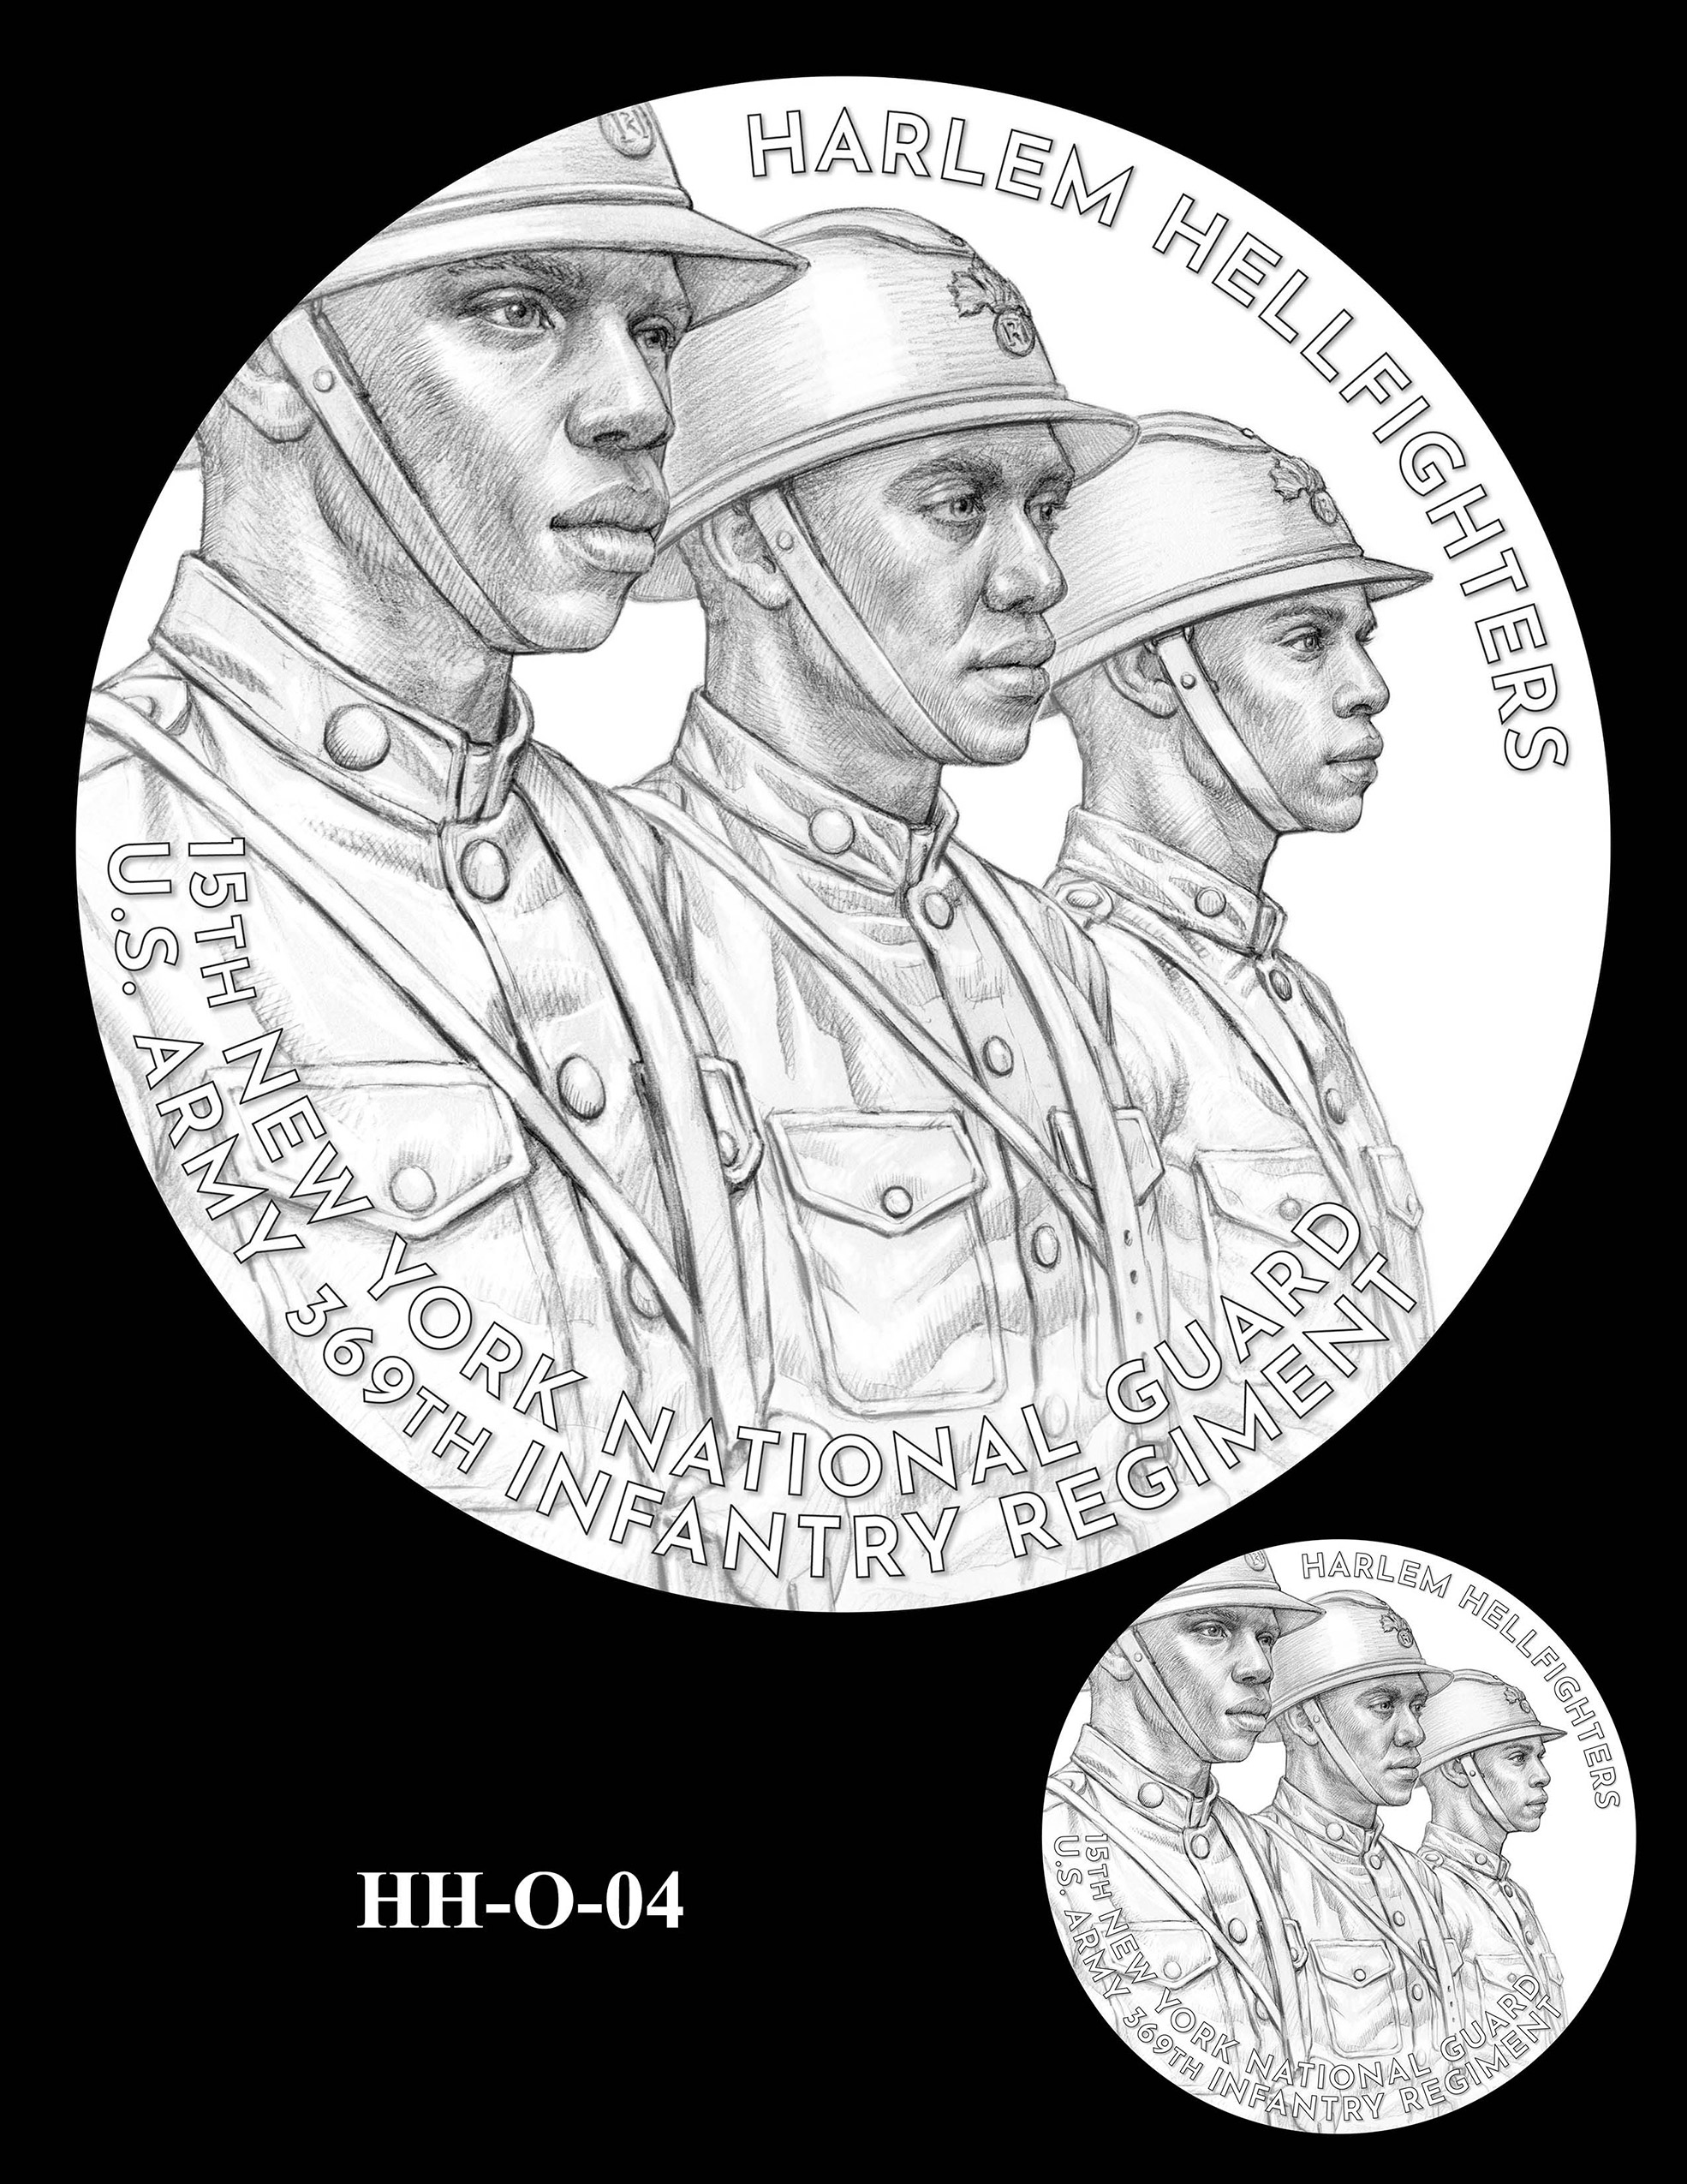 HH-O-04 -- Harlem Hellfighters Congressional Gold Medal